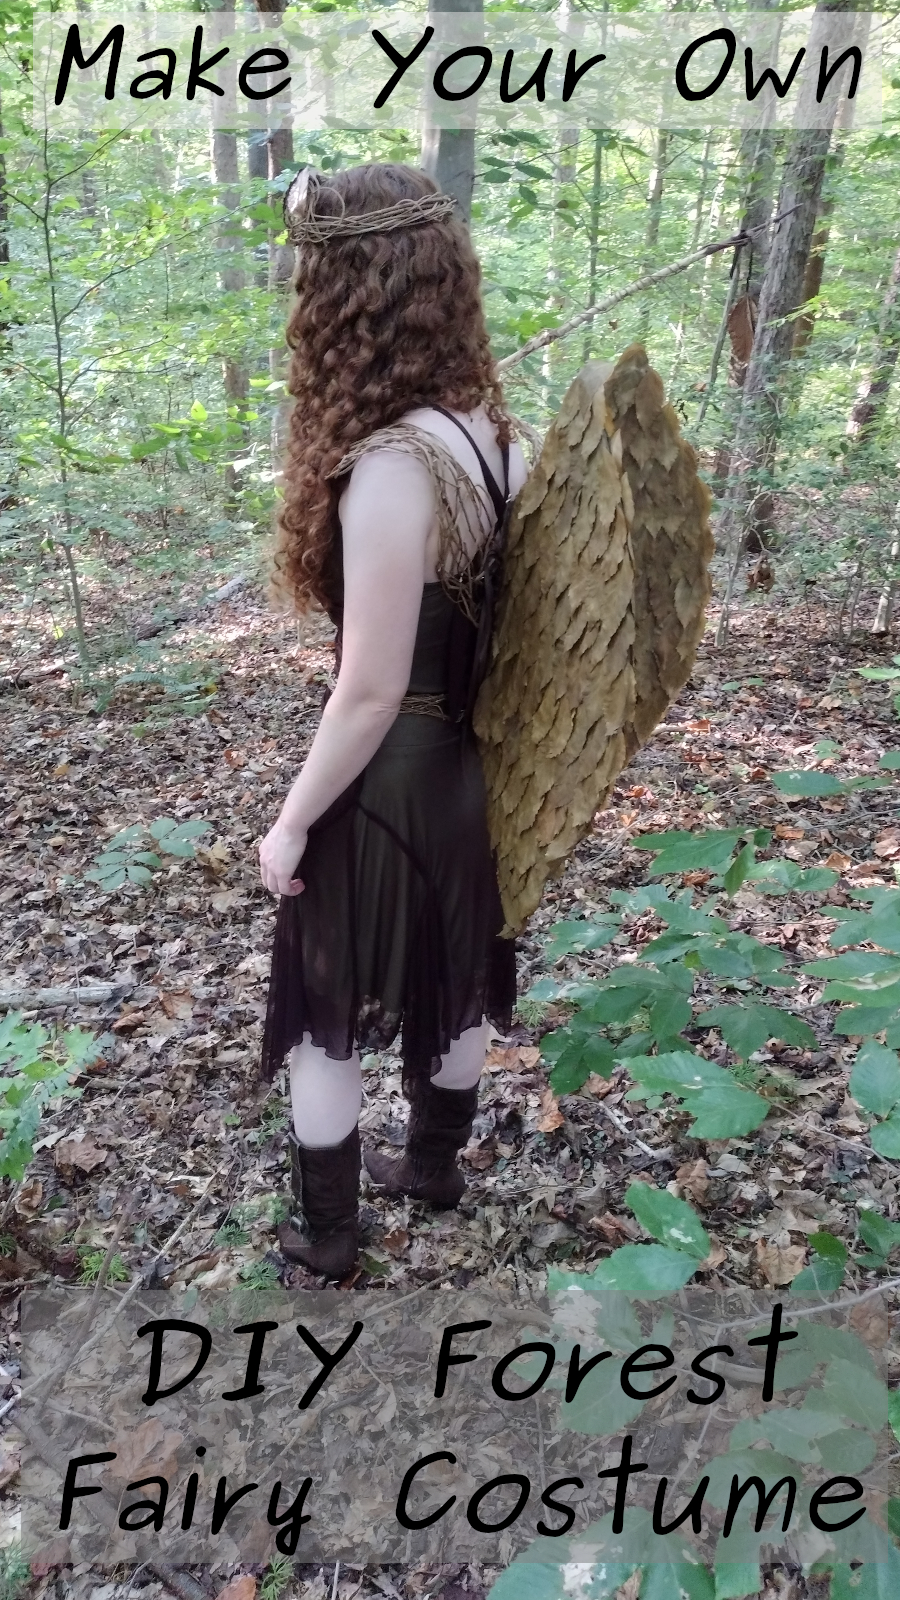 forest fairy wearing boots standing in woods with text overlay: make your own DIY forest fairy costume